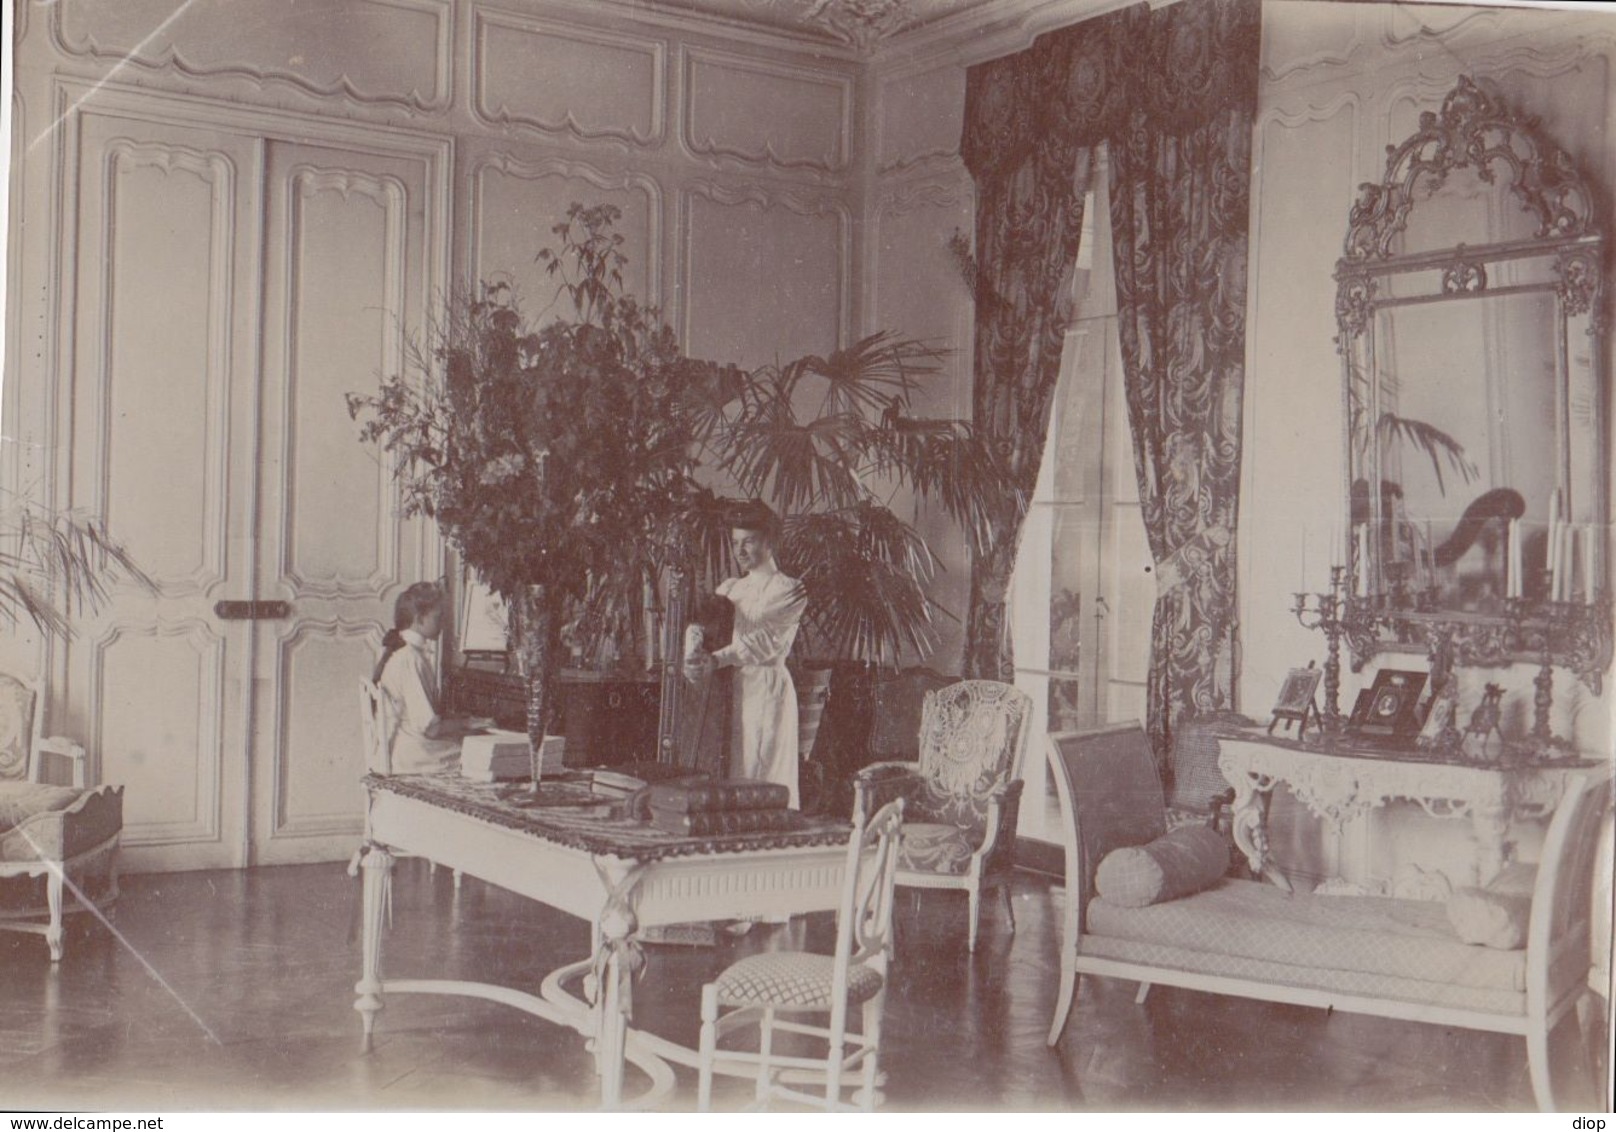 Photographie Anonyme Vintage Snapshot Femme Int&eacute;rieur Bourgeoisie Riche - Personnes Anonymes